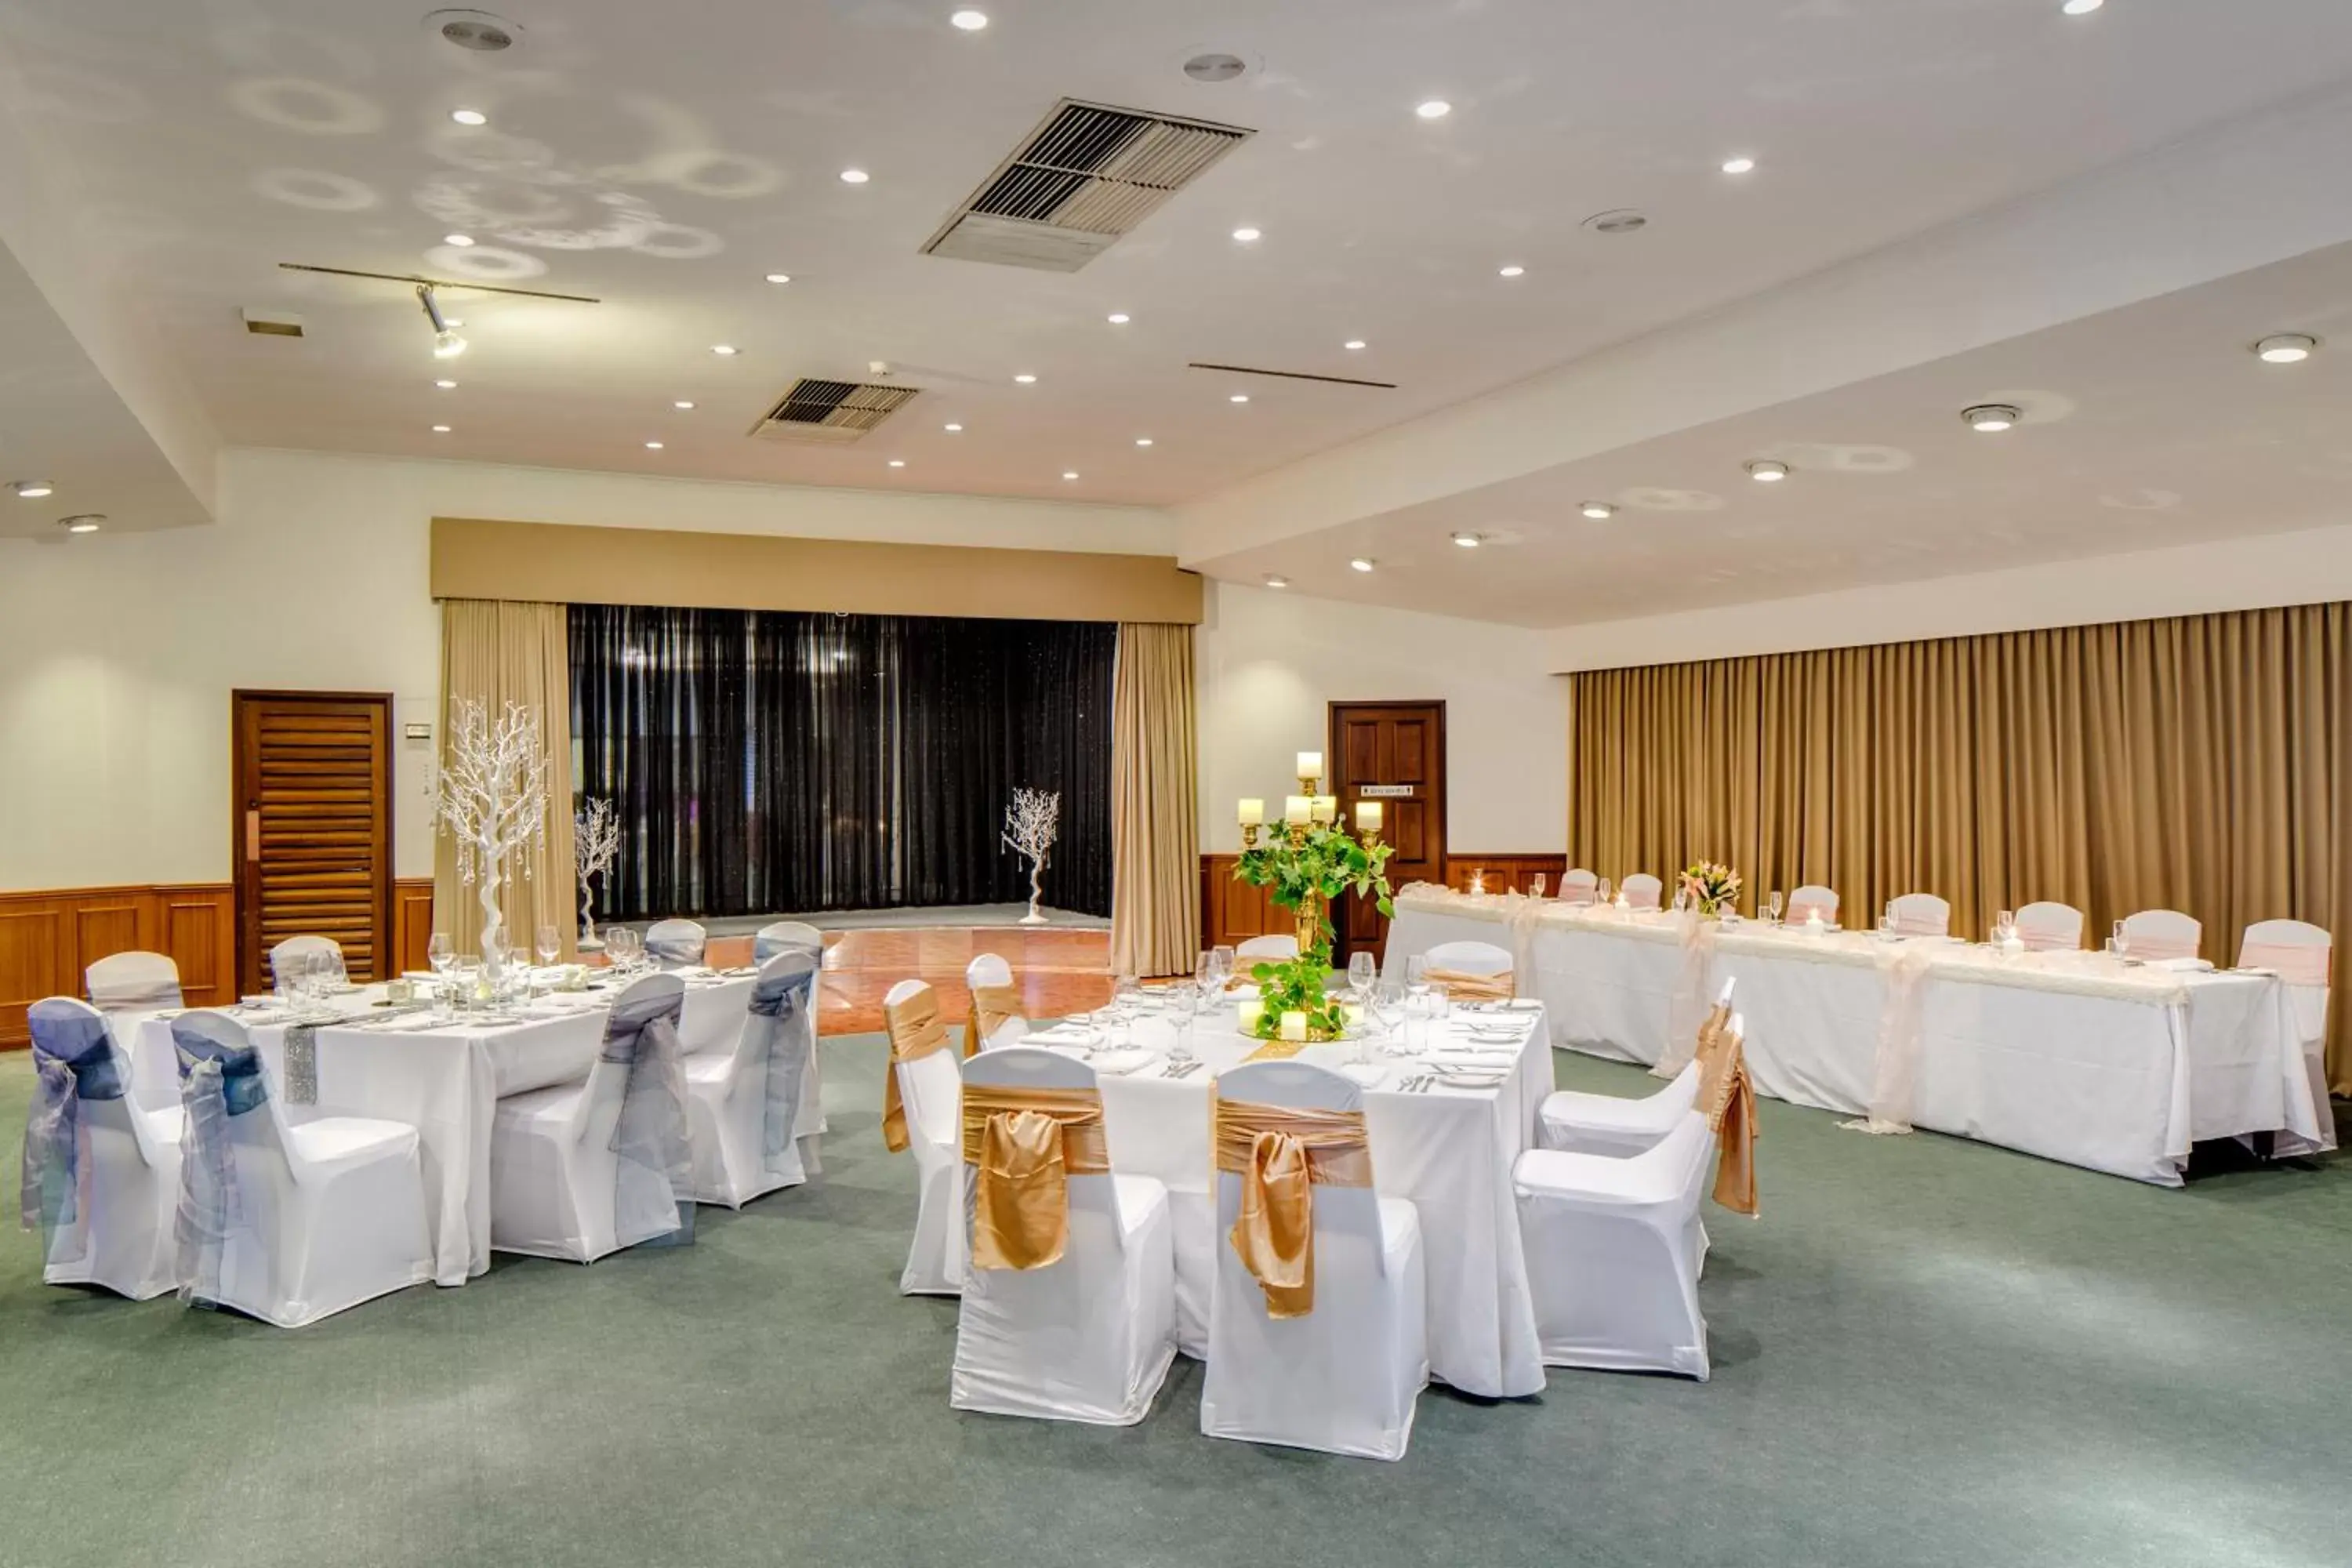 Area and facilities, Banquet Facilities in Adelaide Inn